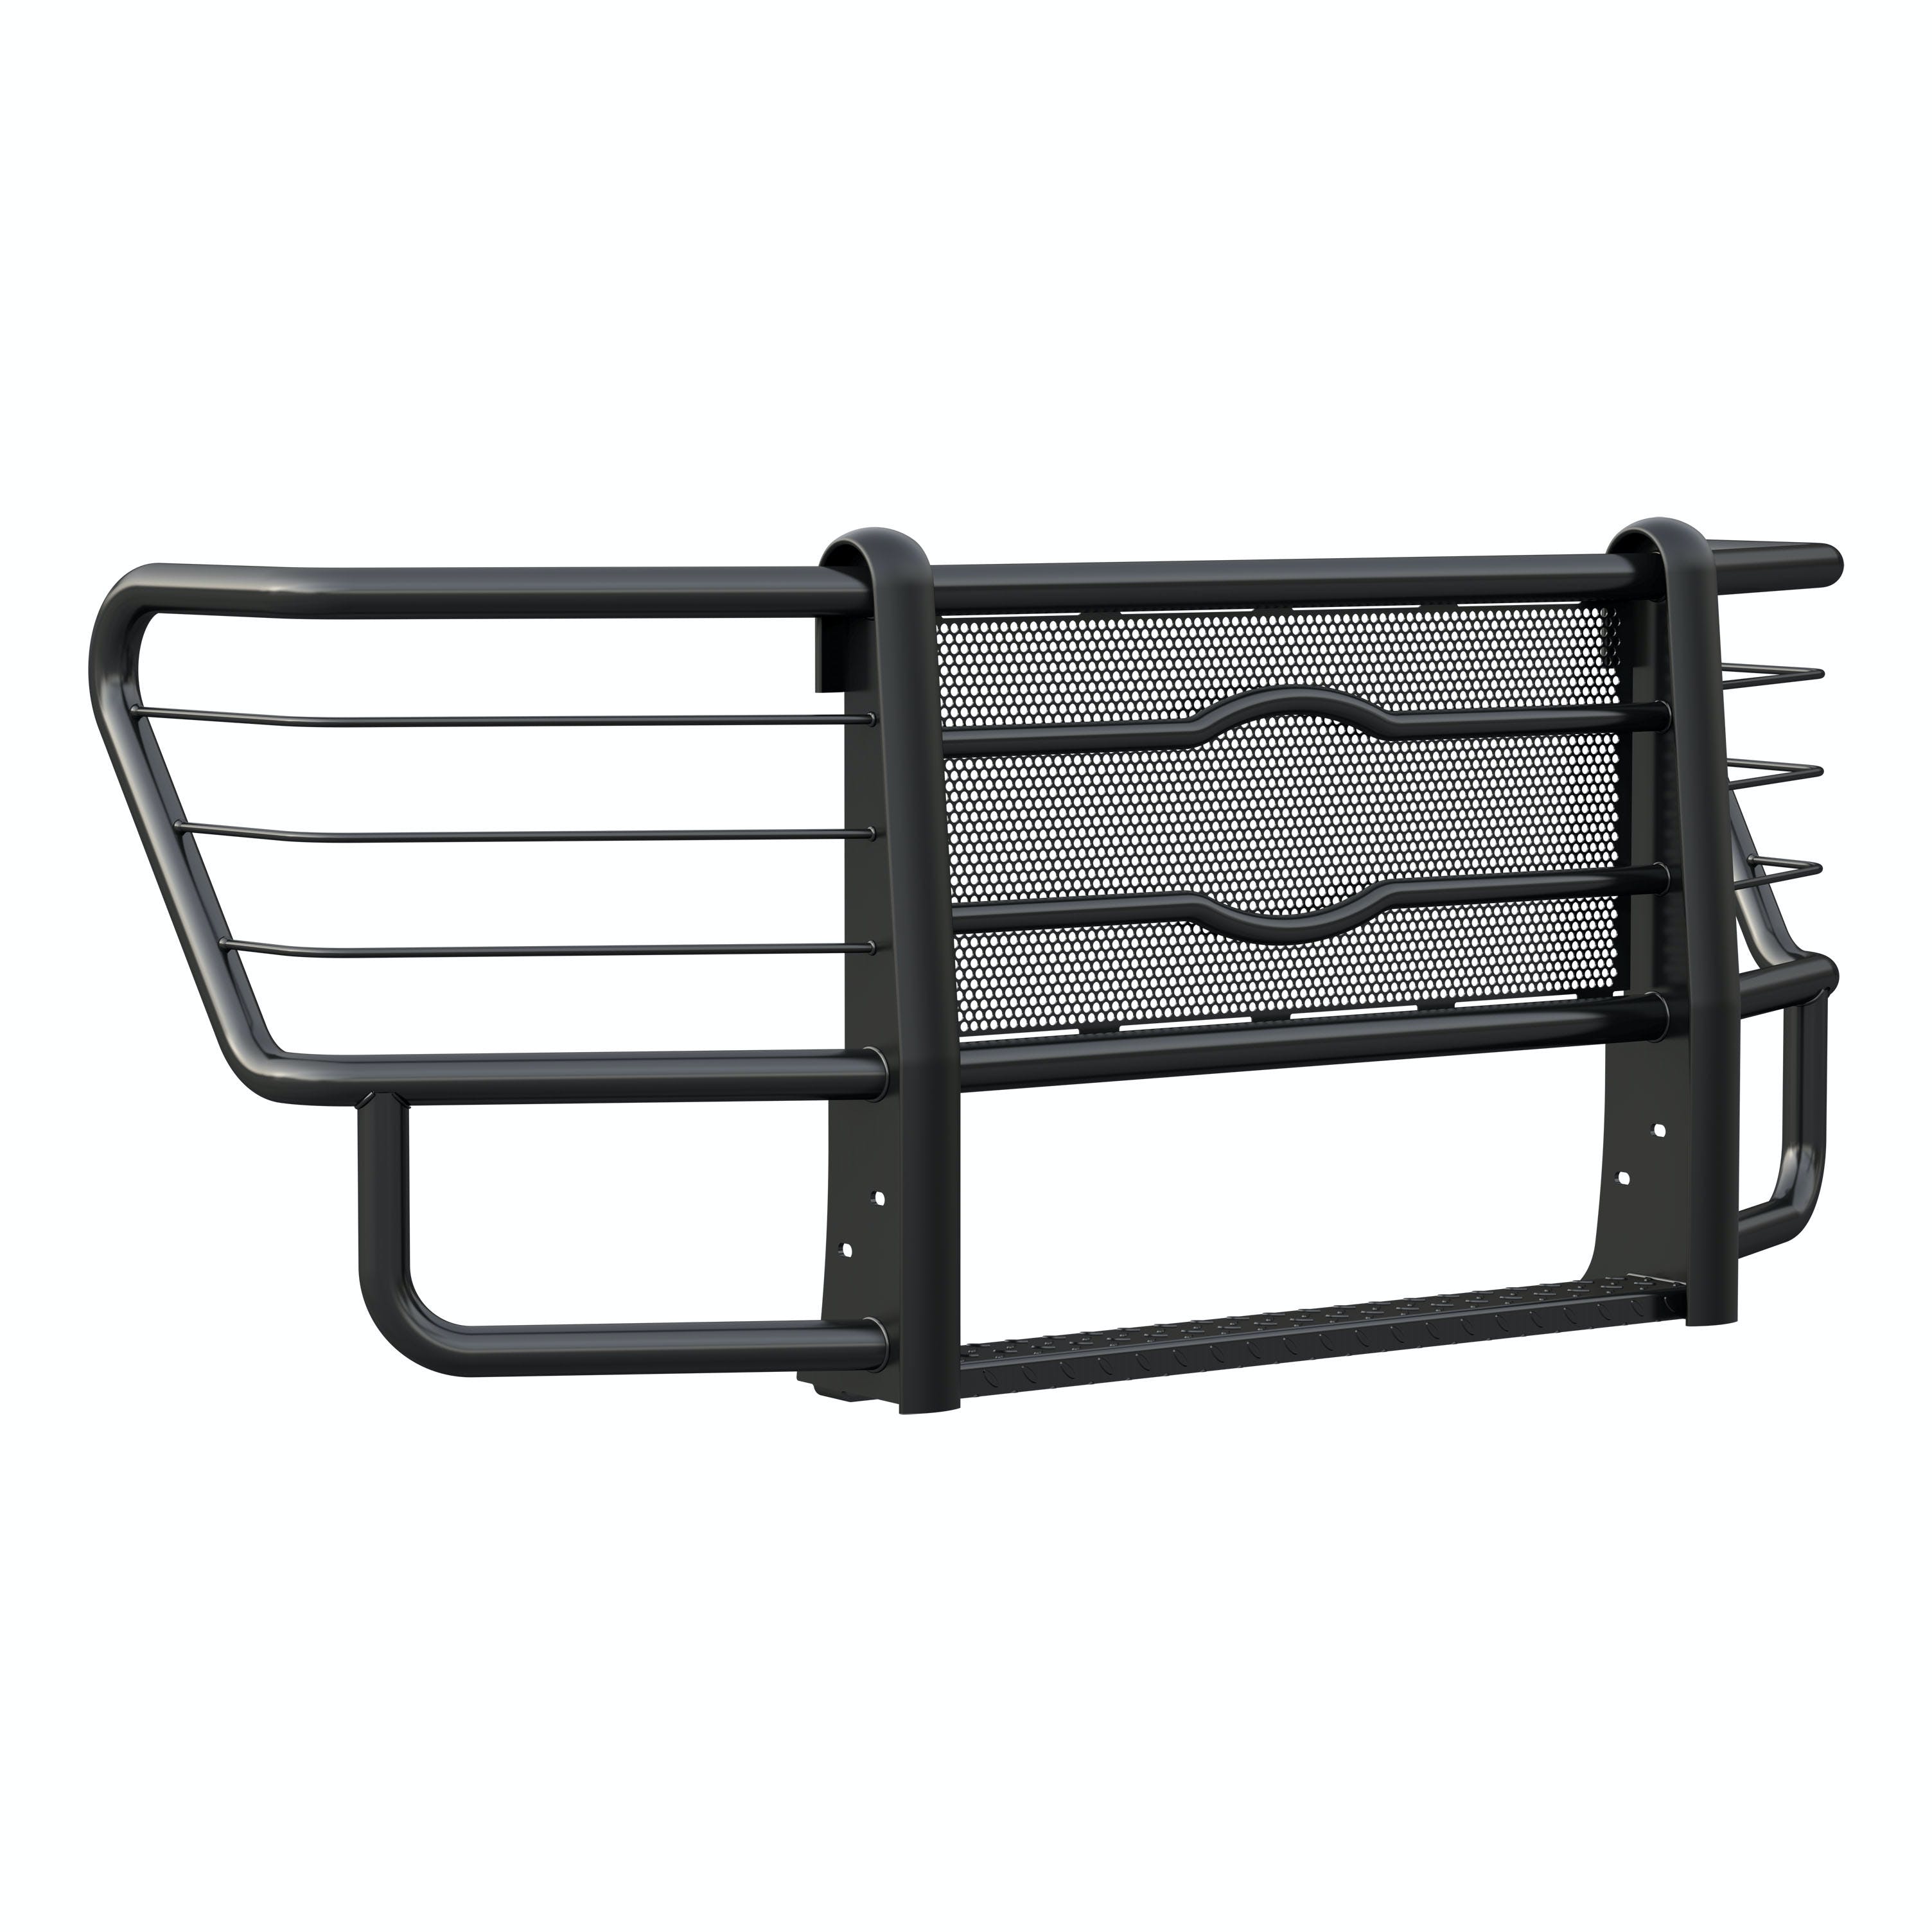 LUVERNE 321723 Prowler Max Grille Guard